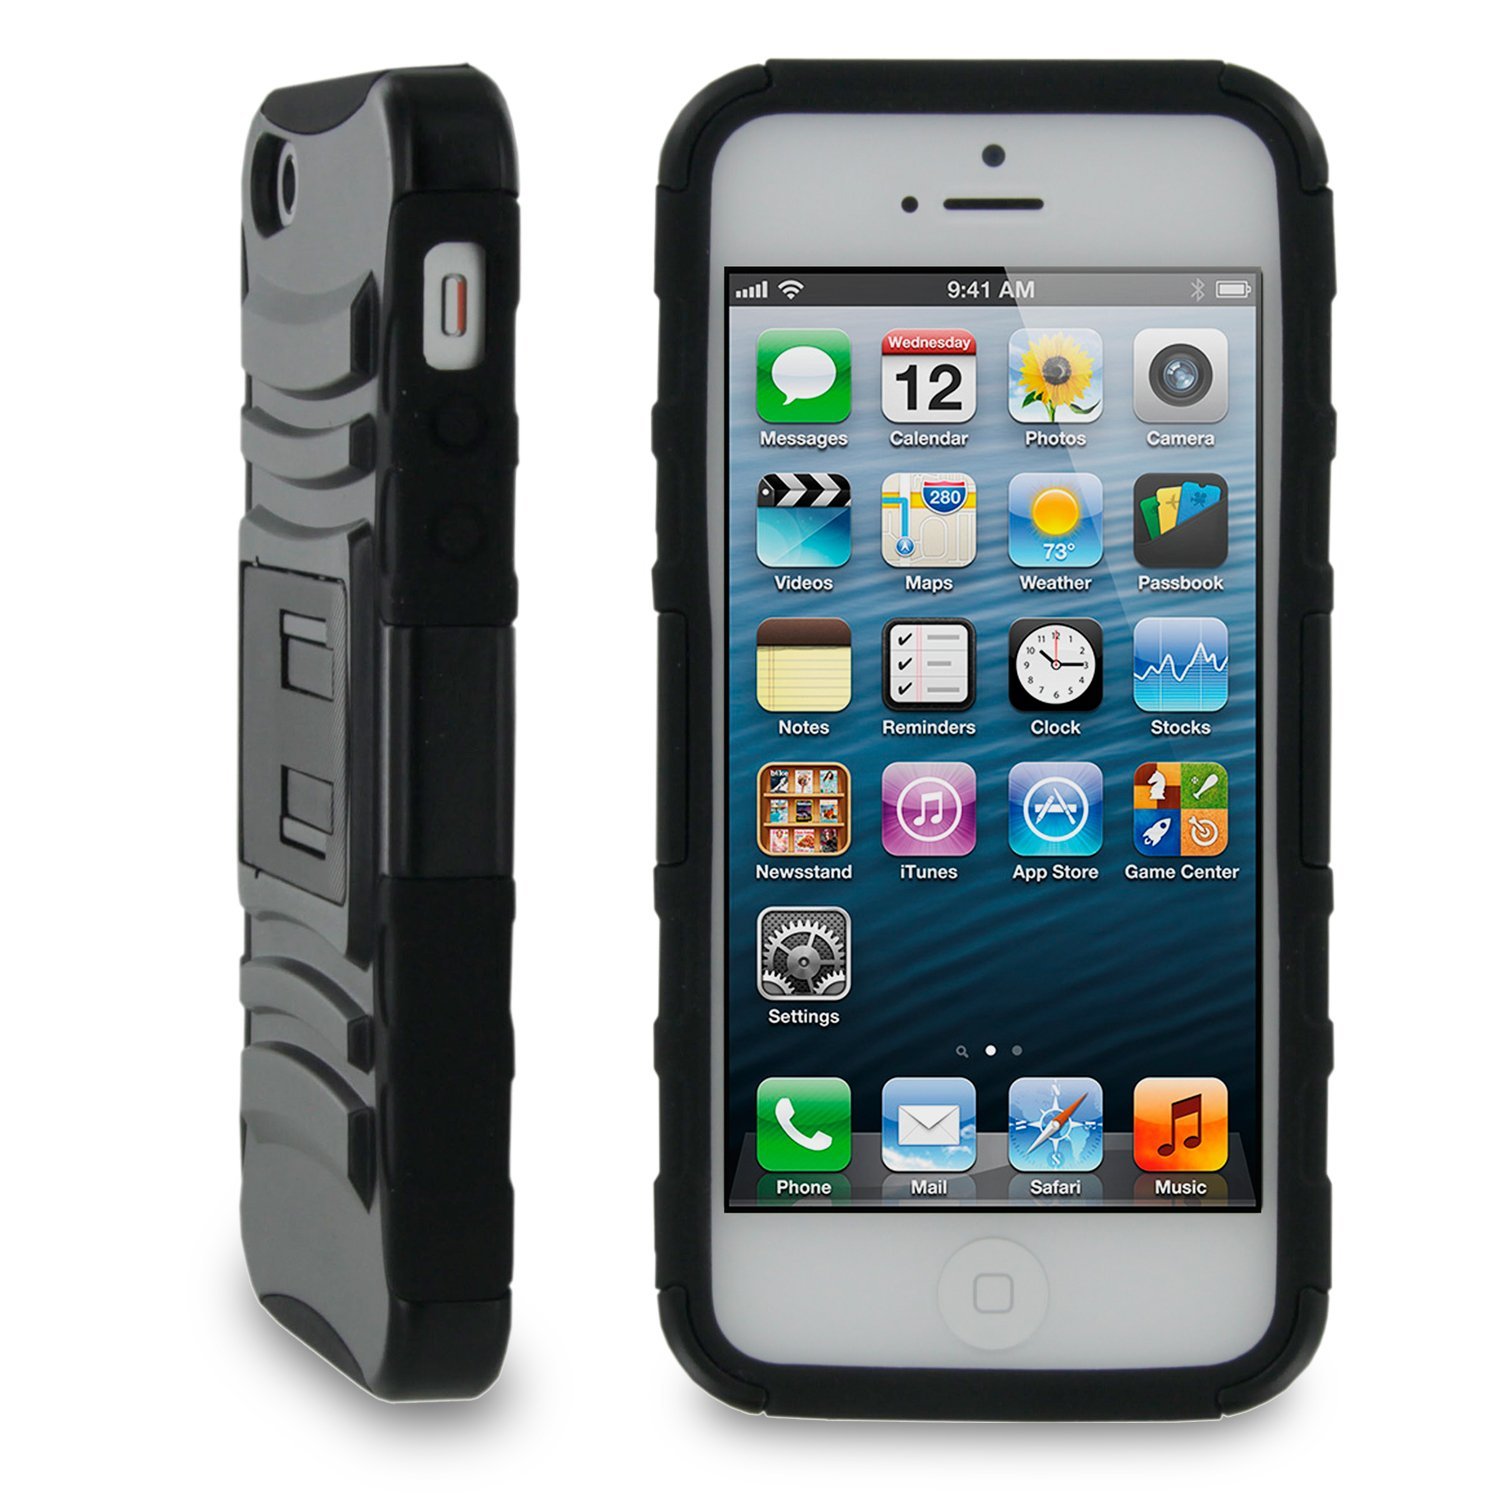 iPhone Hybrid Armor (Black) Case with Holster and Stand for $8.99